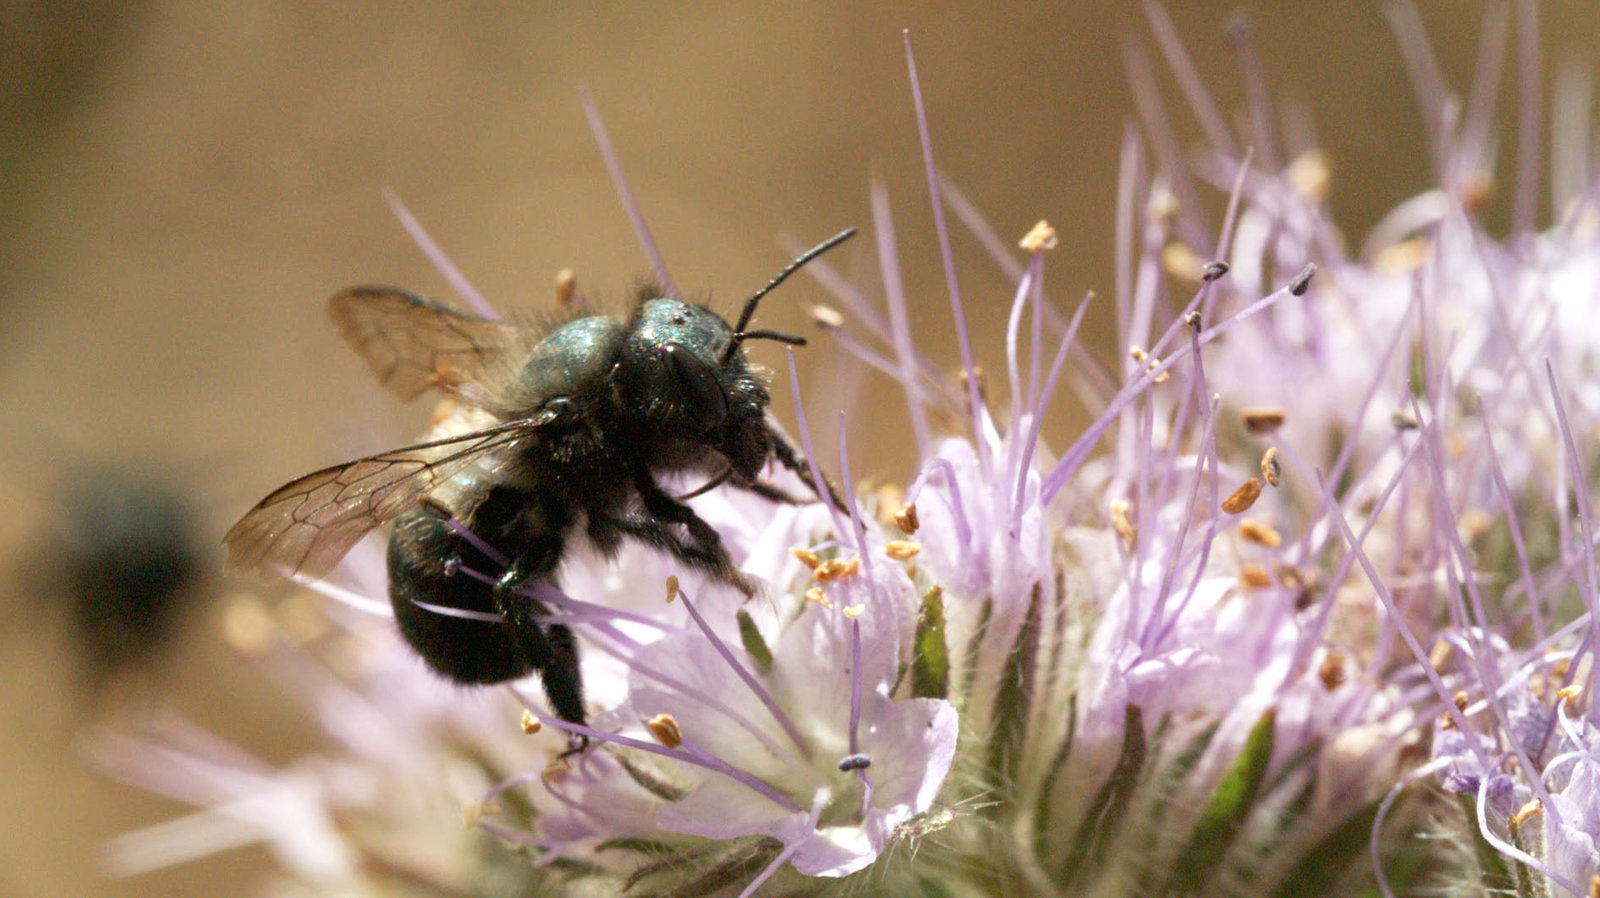 A female blue orchard bee forages for nectar and pollen on Phacelia tanacetifolia flowers, also known as blue or purple tansy. Blue orchard bees are solitary bees that help pollinate California's almond orchards. CREDIT: JOSH CASSIDY